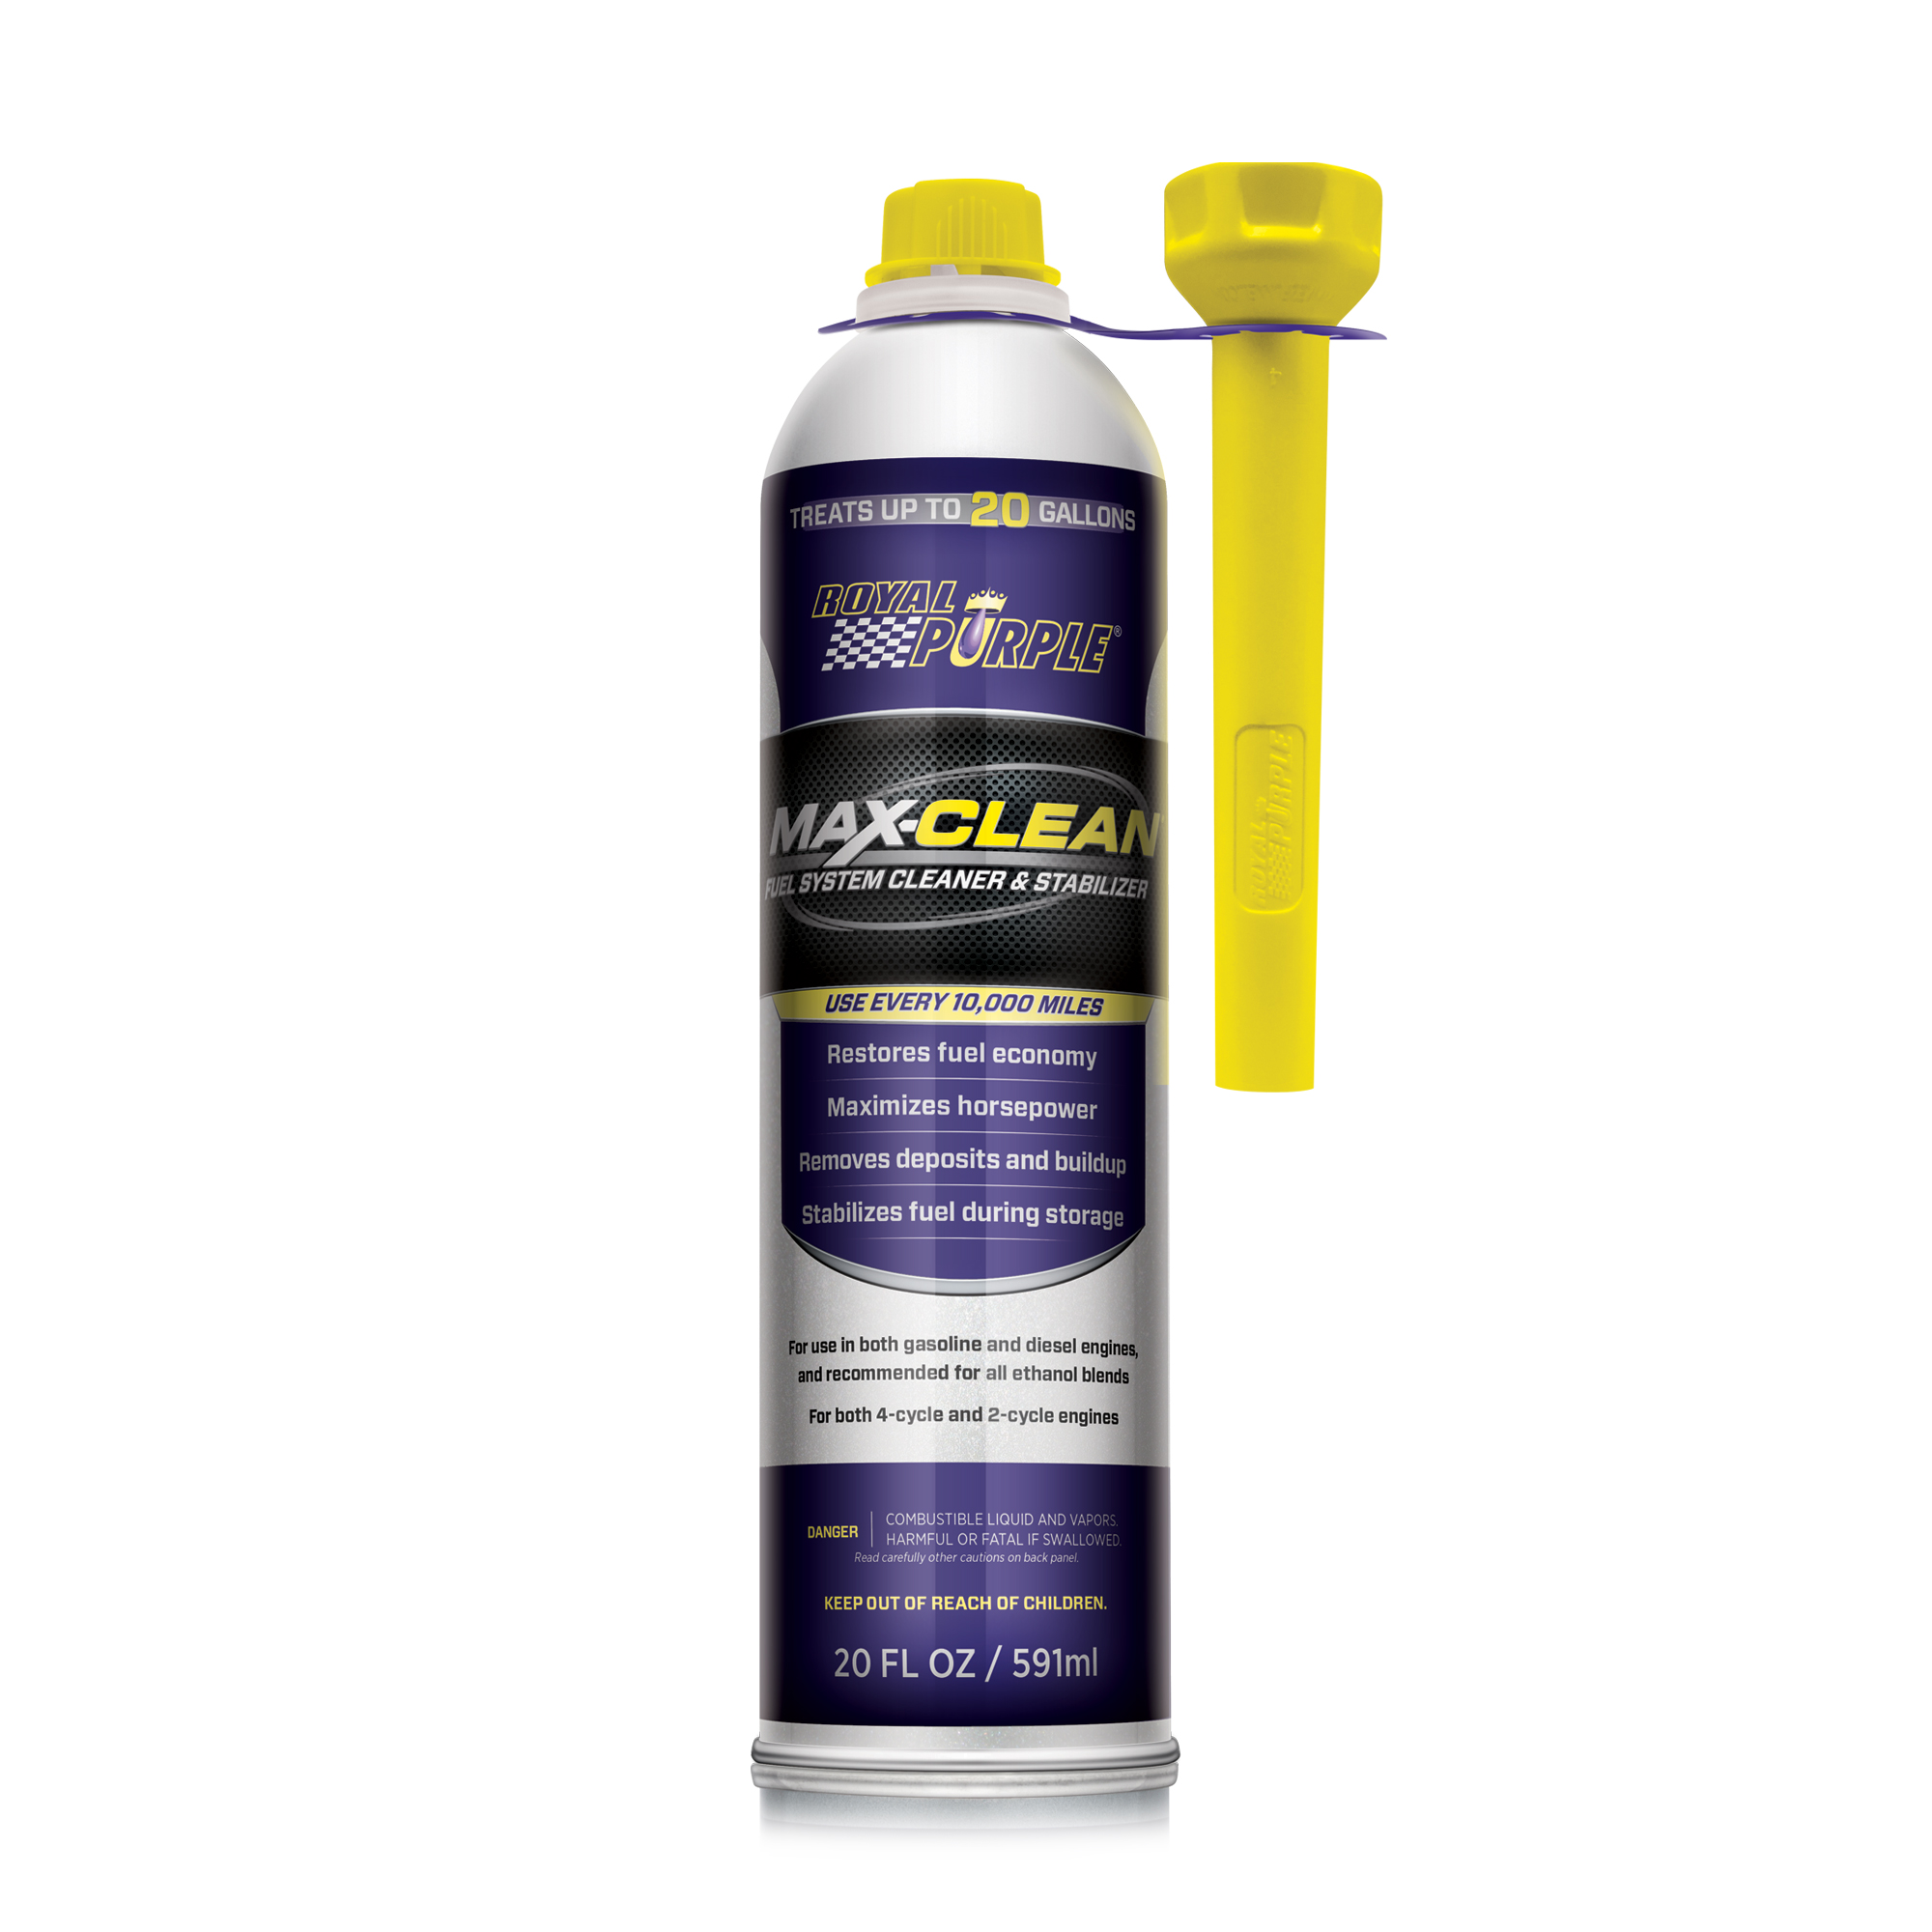 ROYAL PURPLE MAX-CLEAN Fuel System Cleaner & Stabilizer